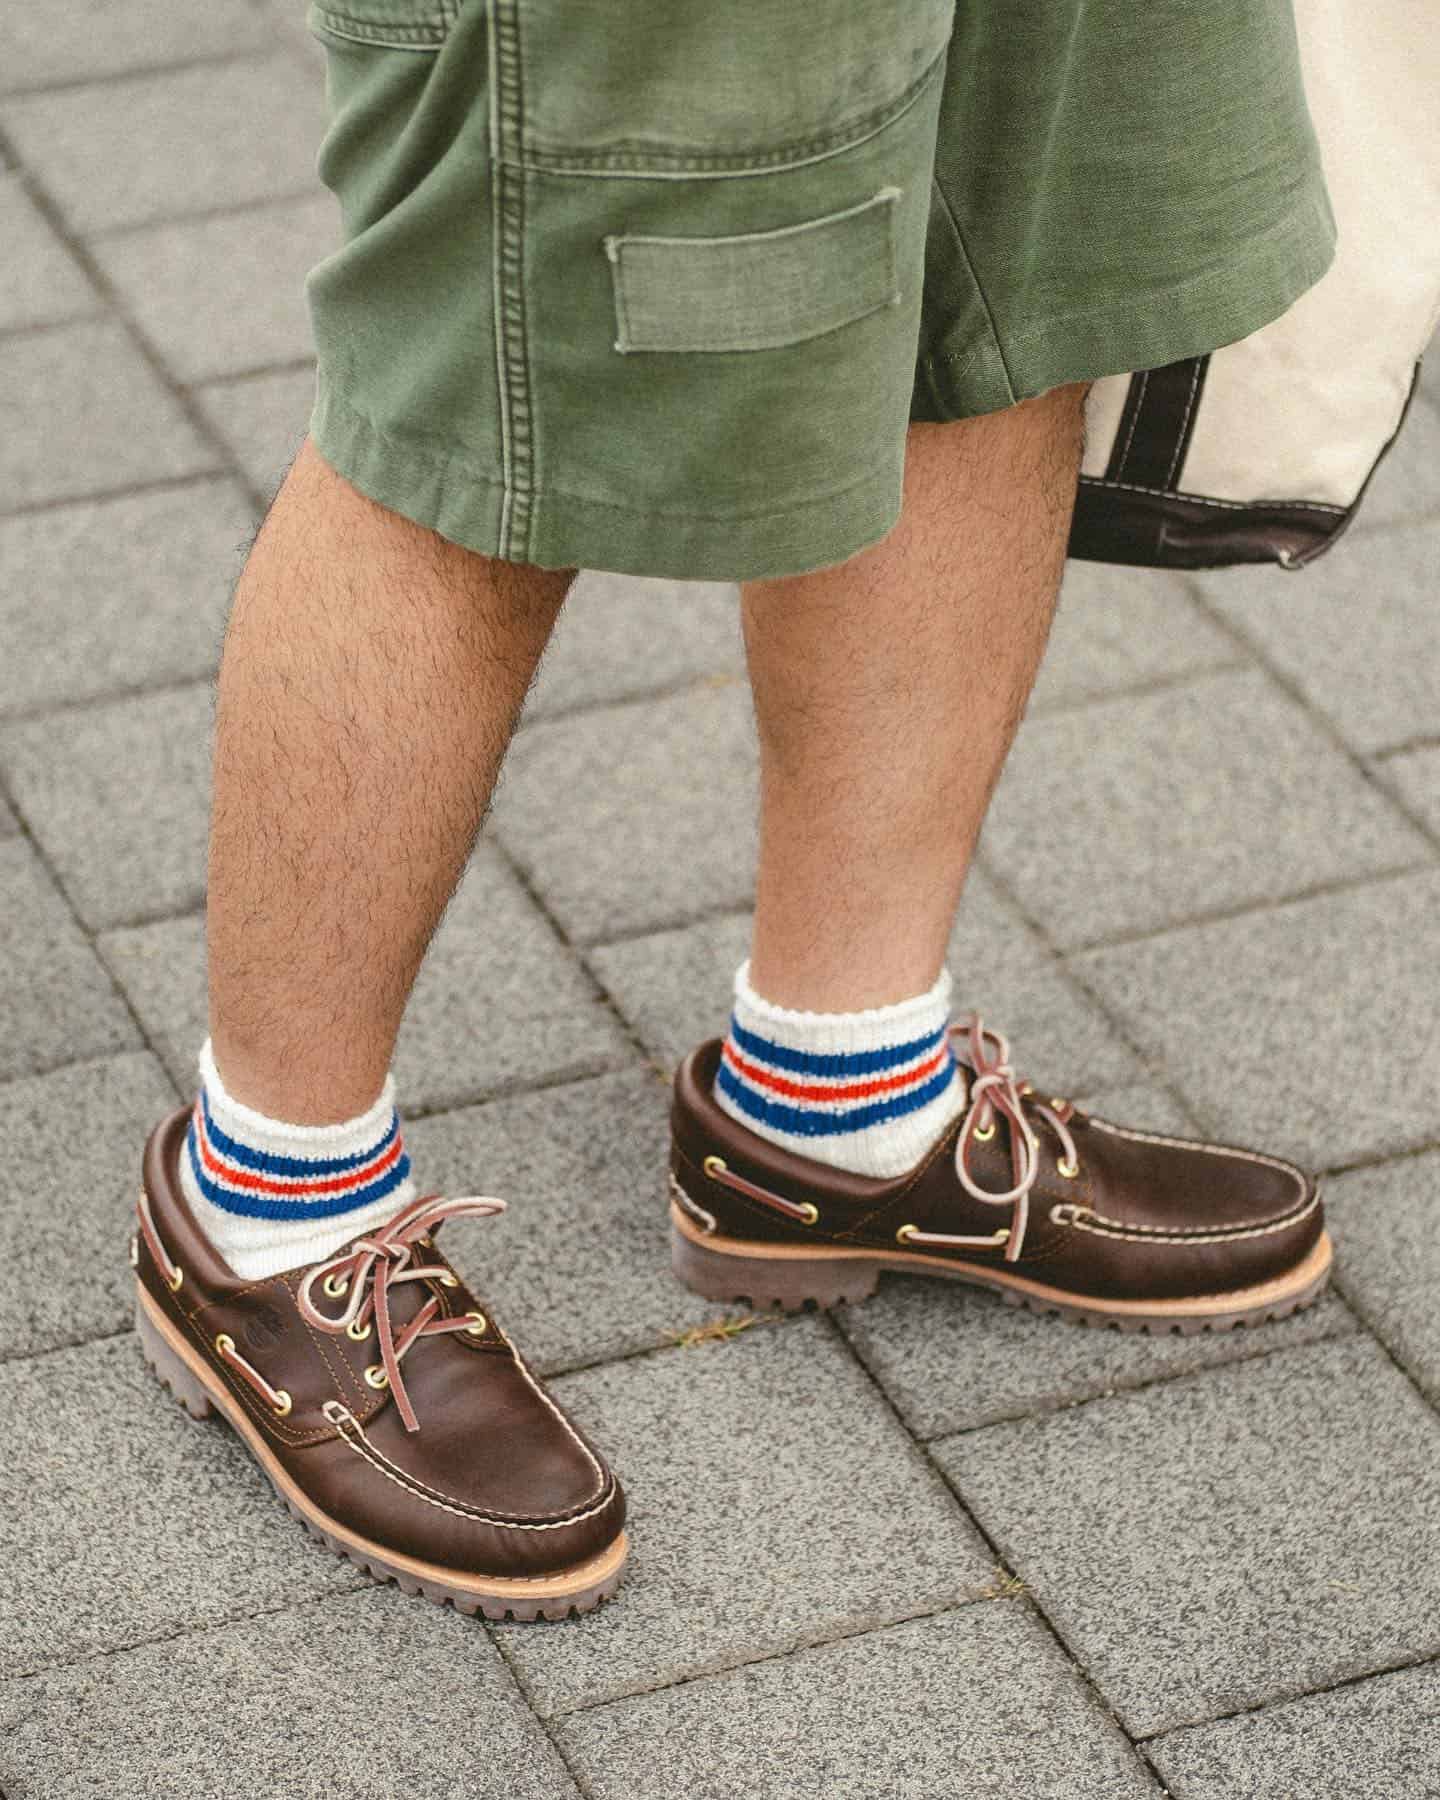 wearing a pair of leather boat shoes